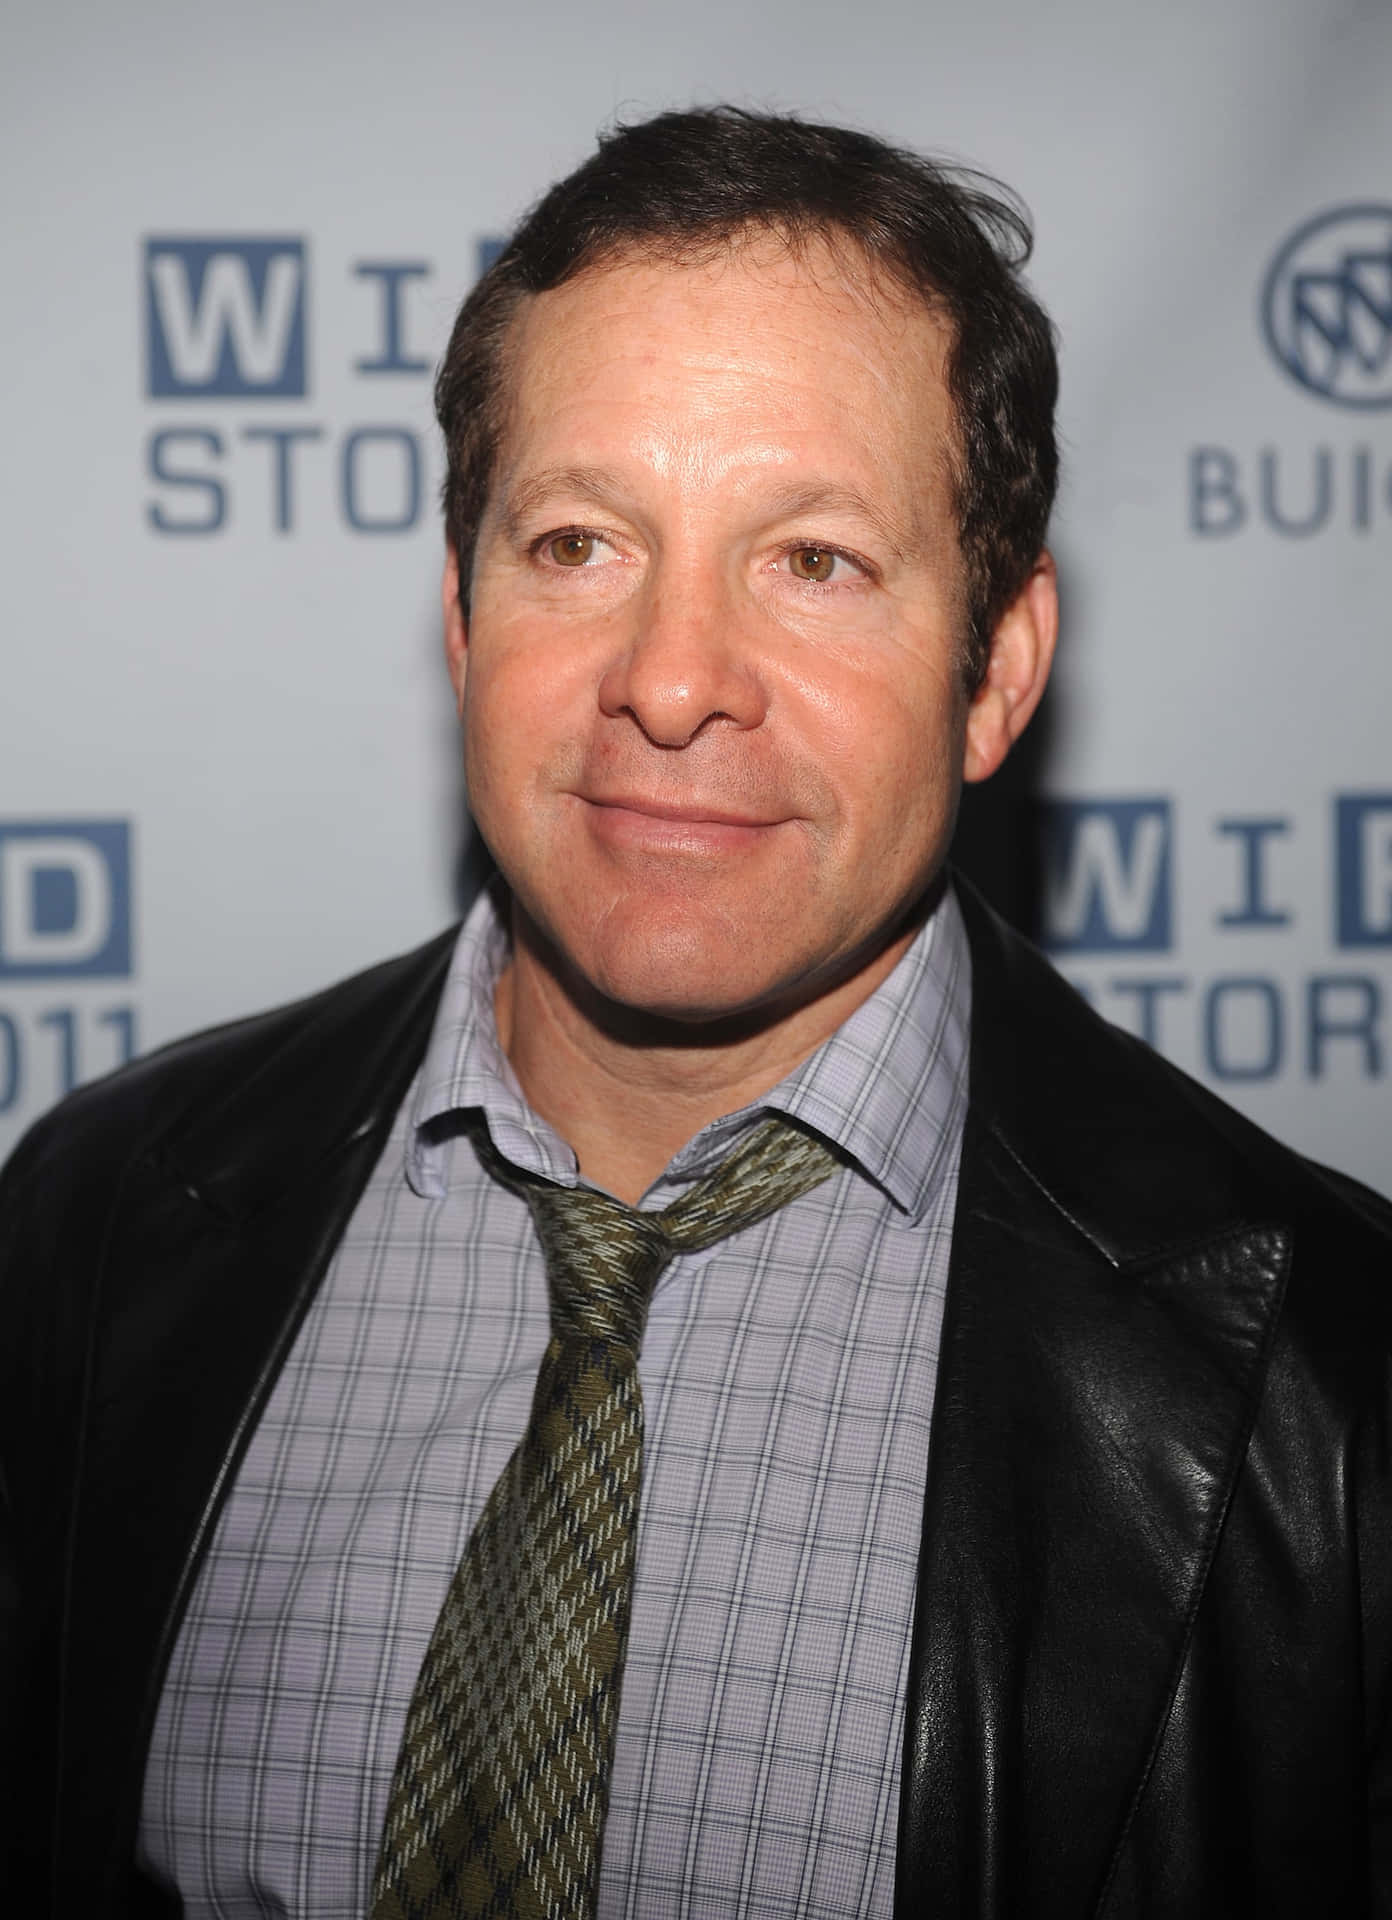 Steve Guttenberg, a Hollywood actor known for his roles in Police Academy and Diner. Wallpaper